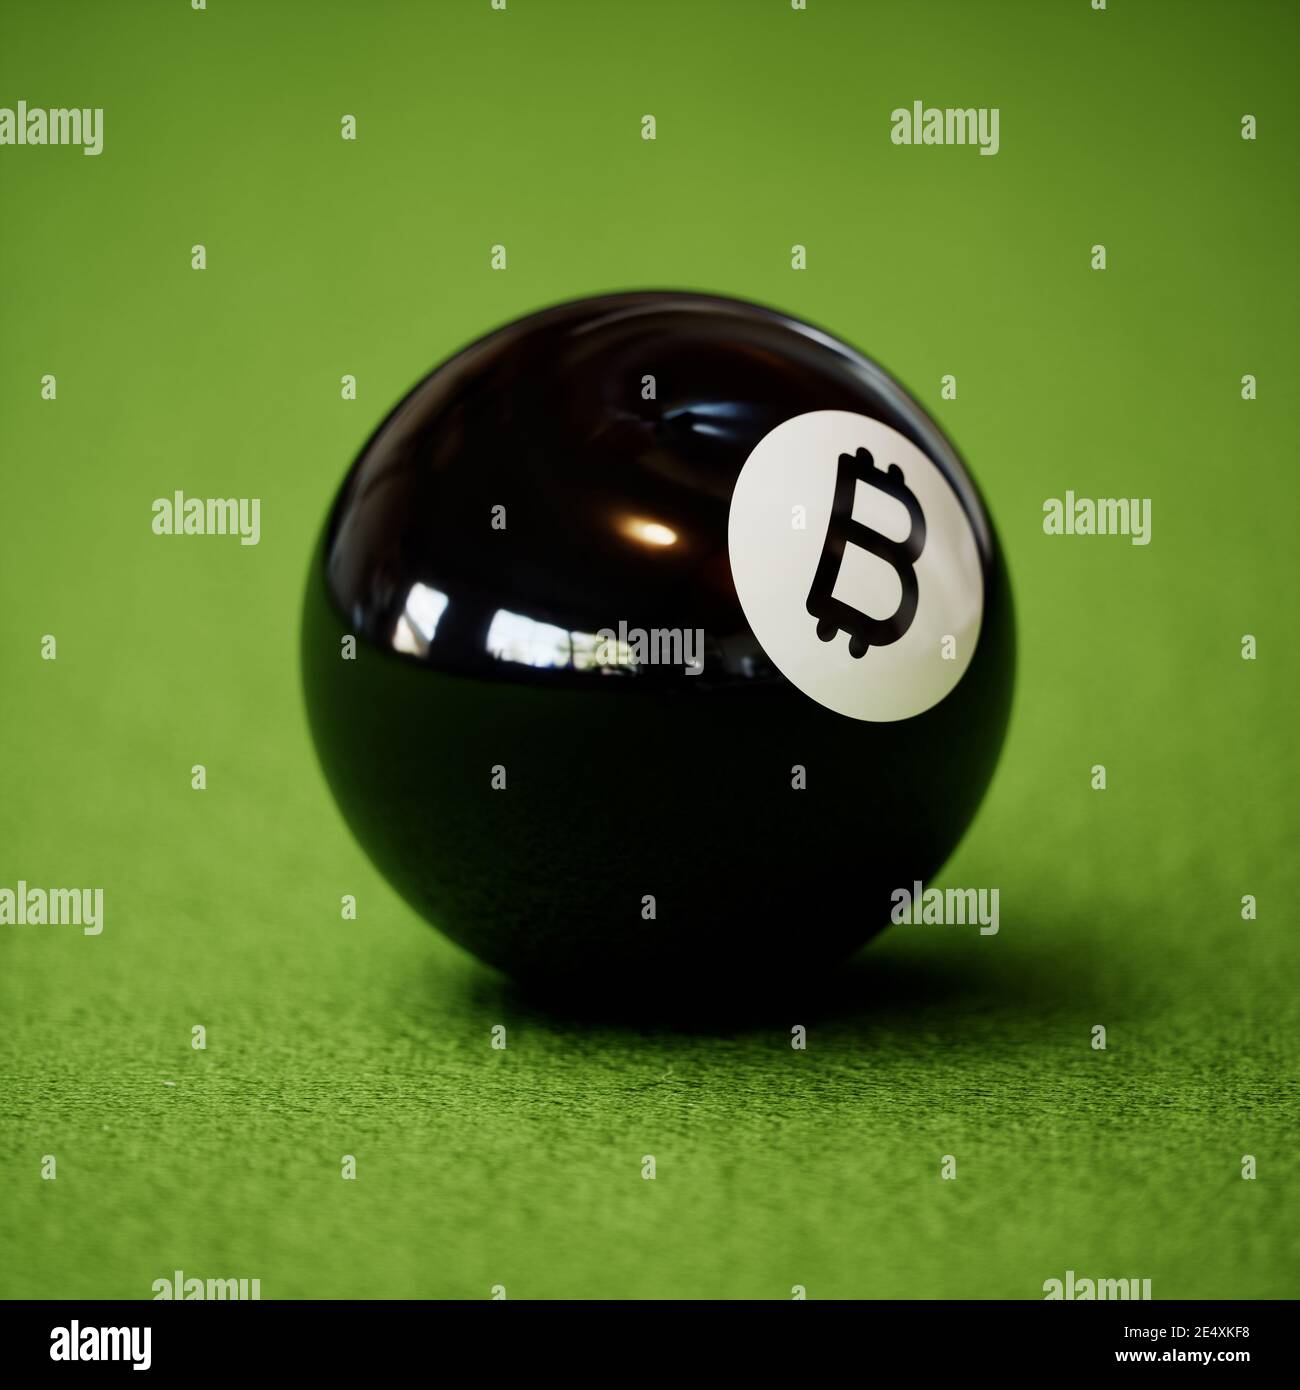 Snooker 8 pool ball Bitcoin concept. 3d rendering illustration Stock Photo